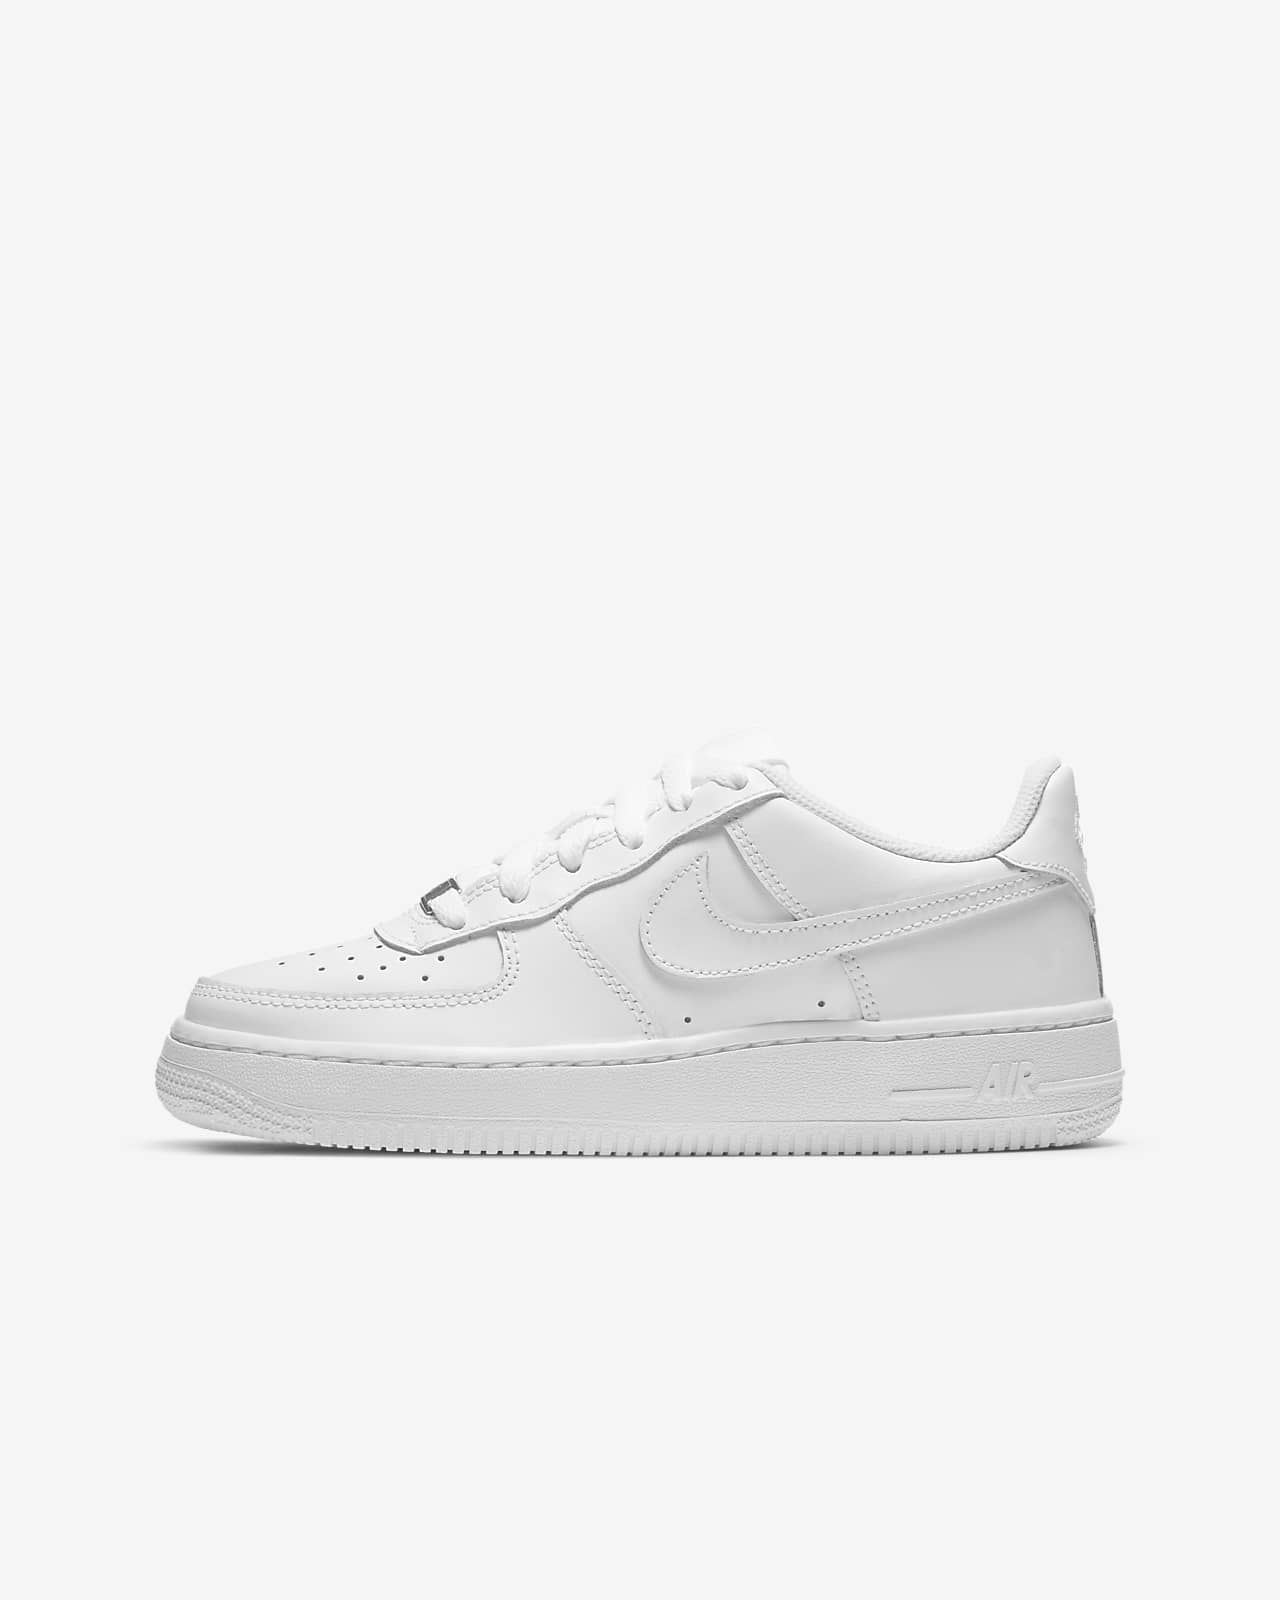 size 5.5 nike air force